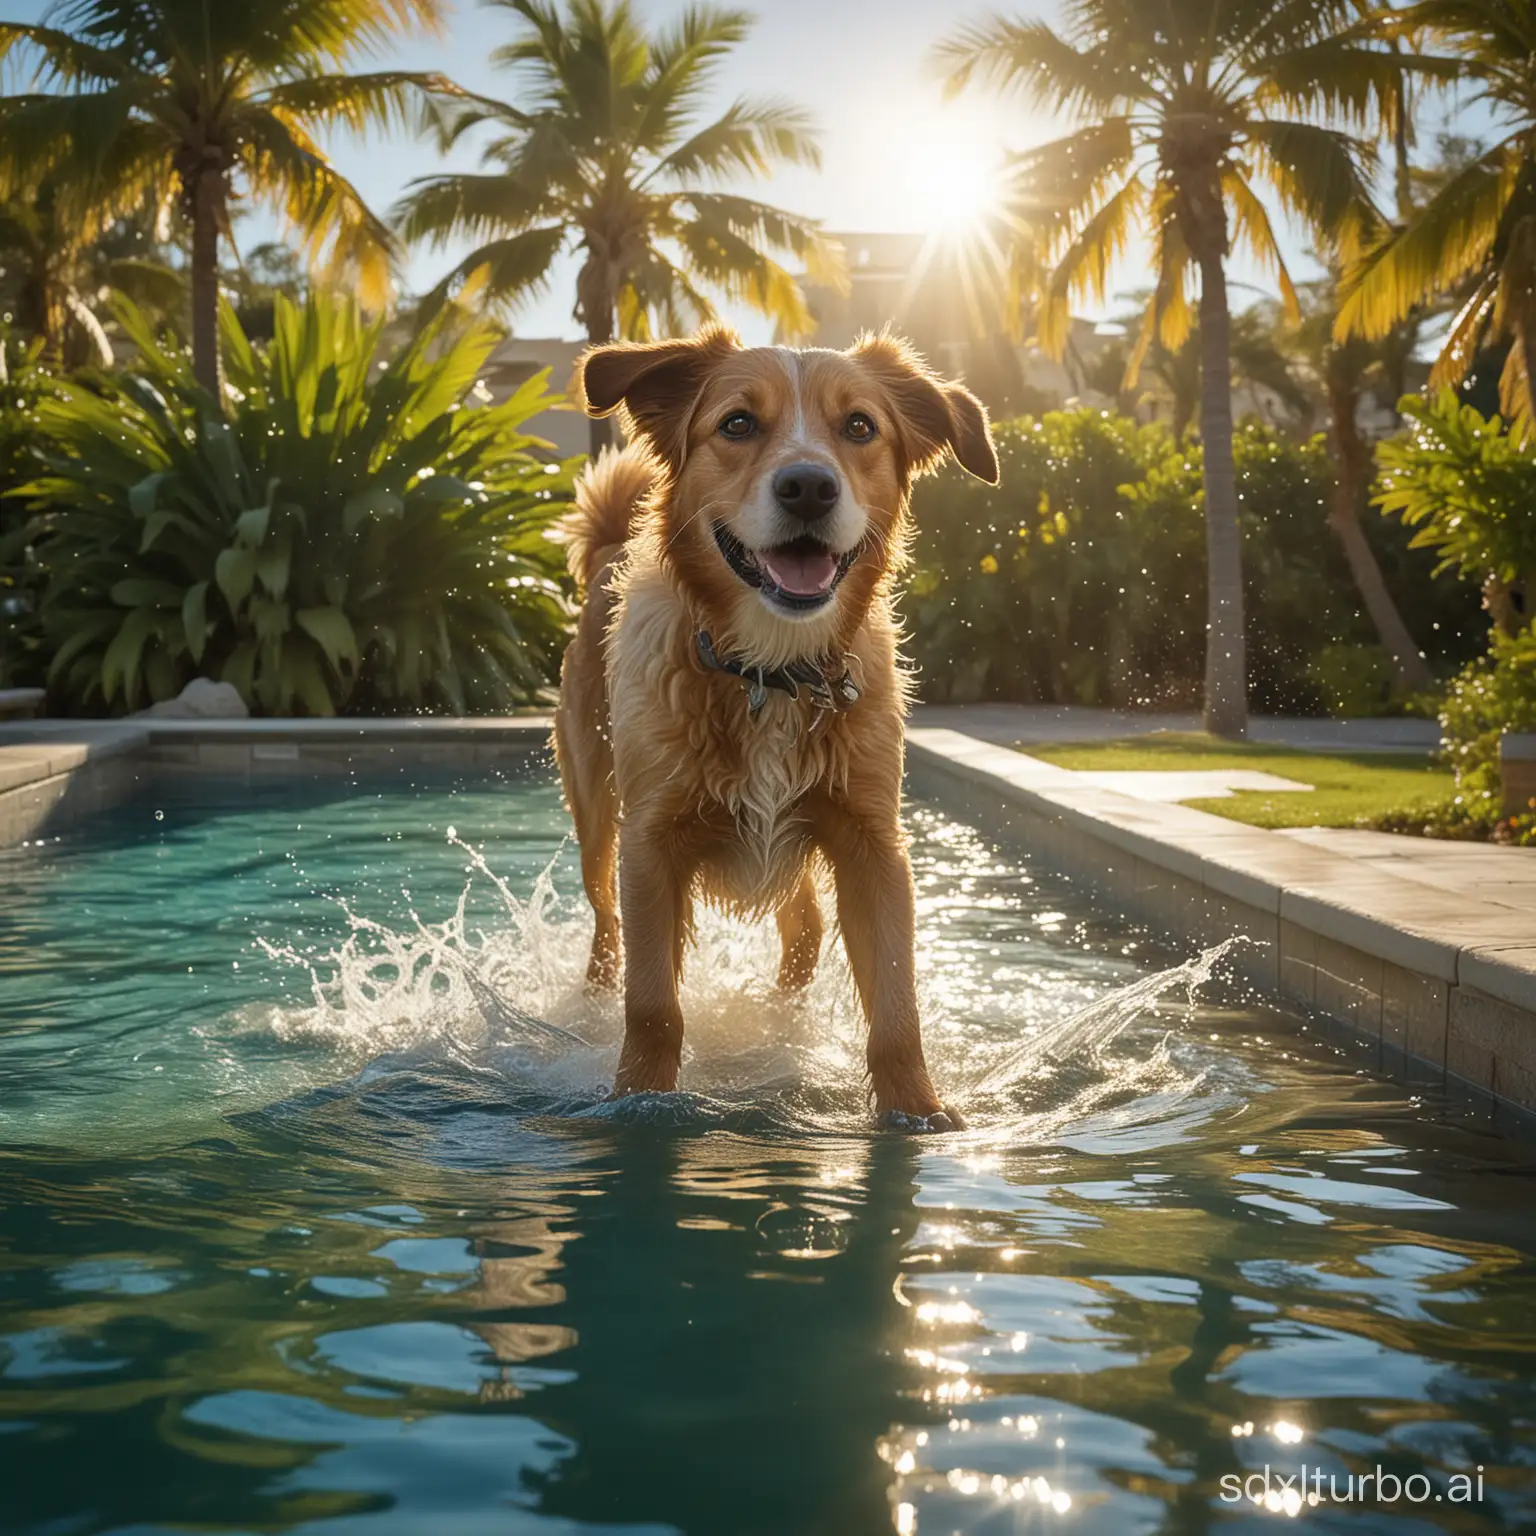 Golden-Retriever-on-the-Brink-of-Diving-into-a-Crystal-Blue-Pool